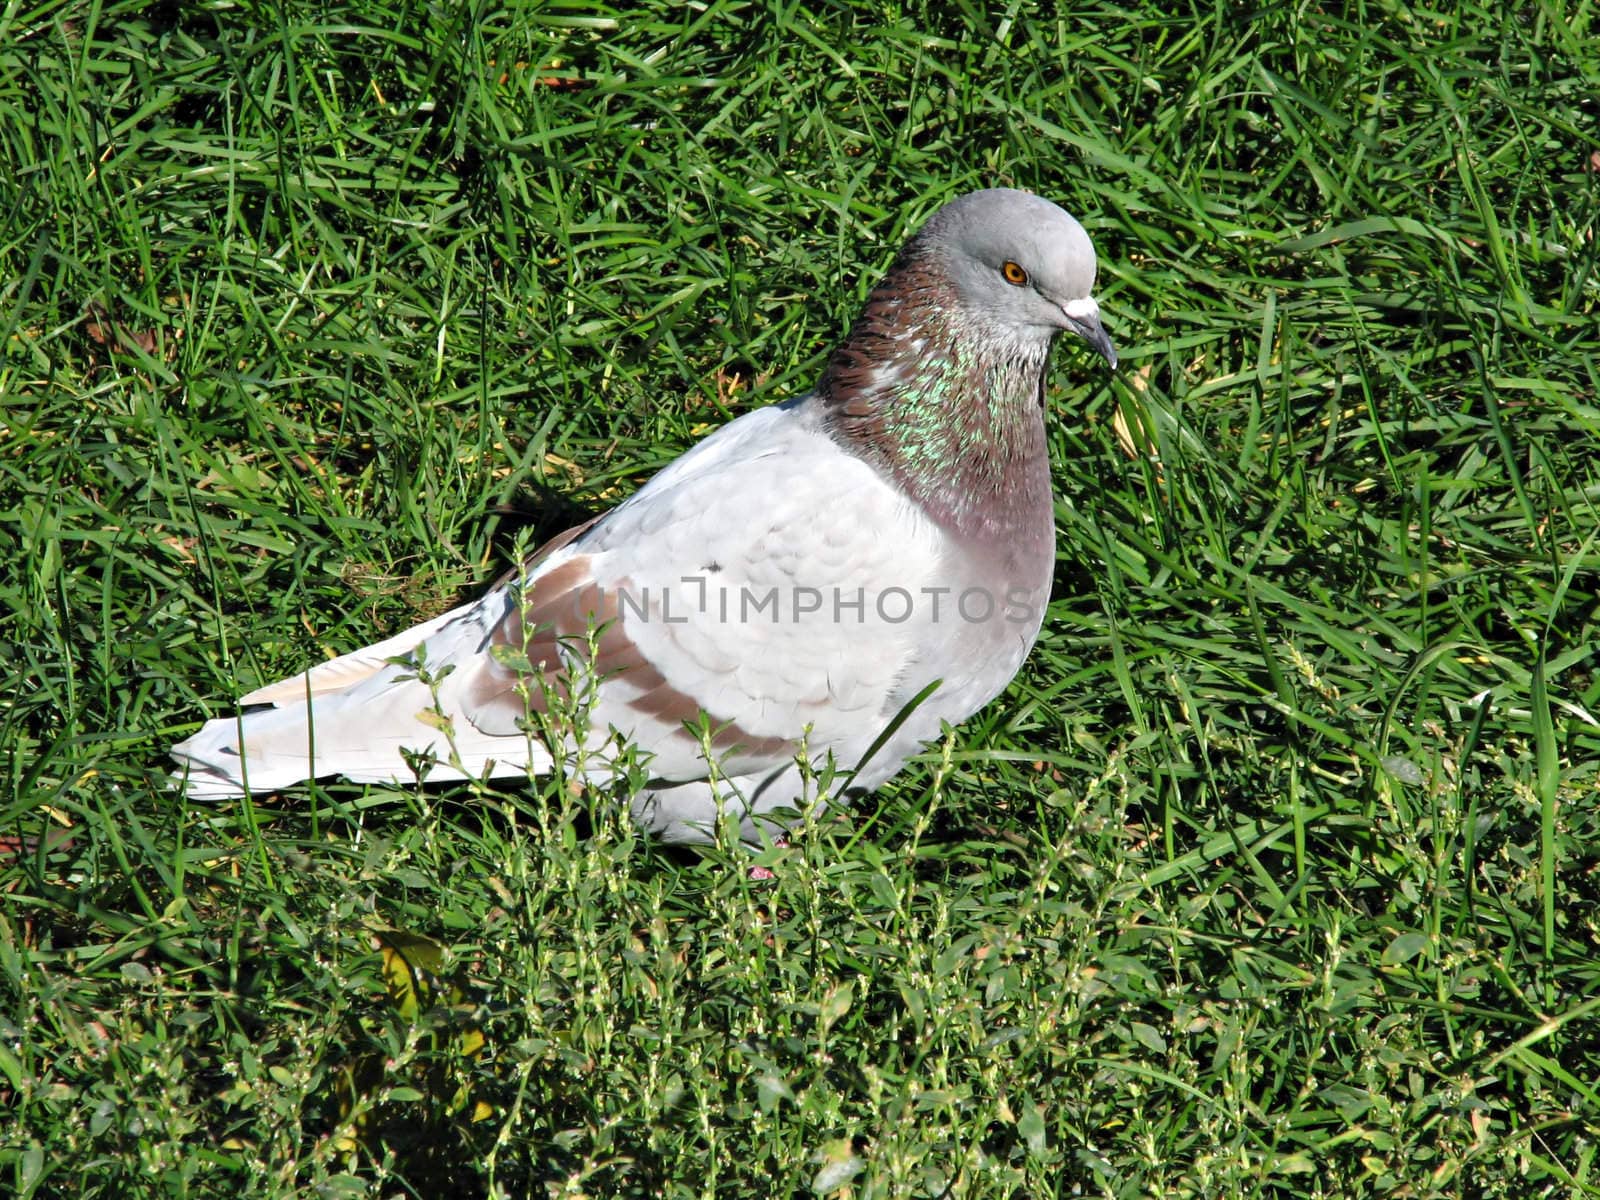 A rock pigeon sitting in the grass